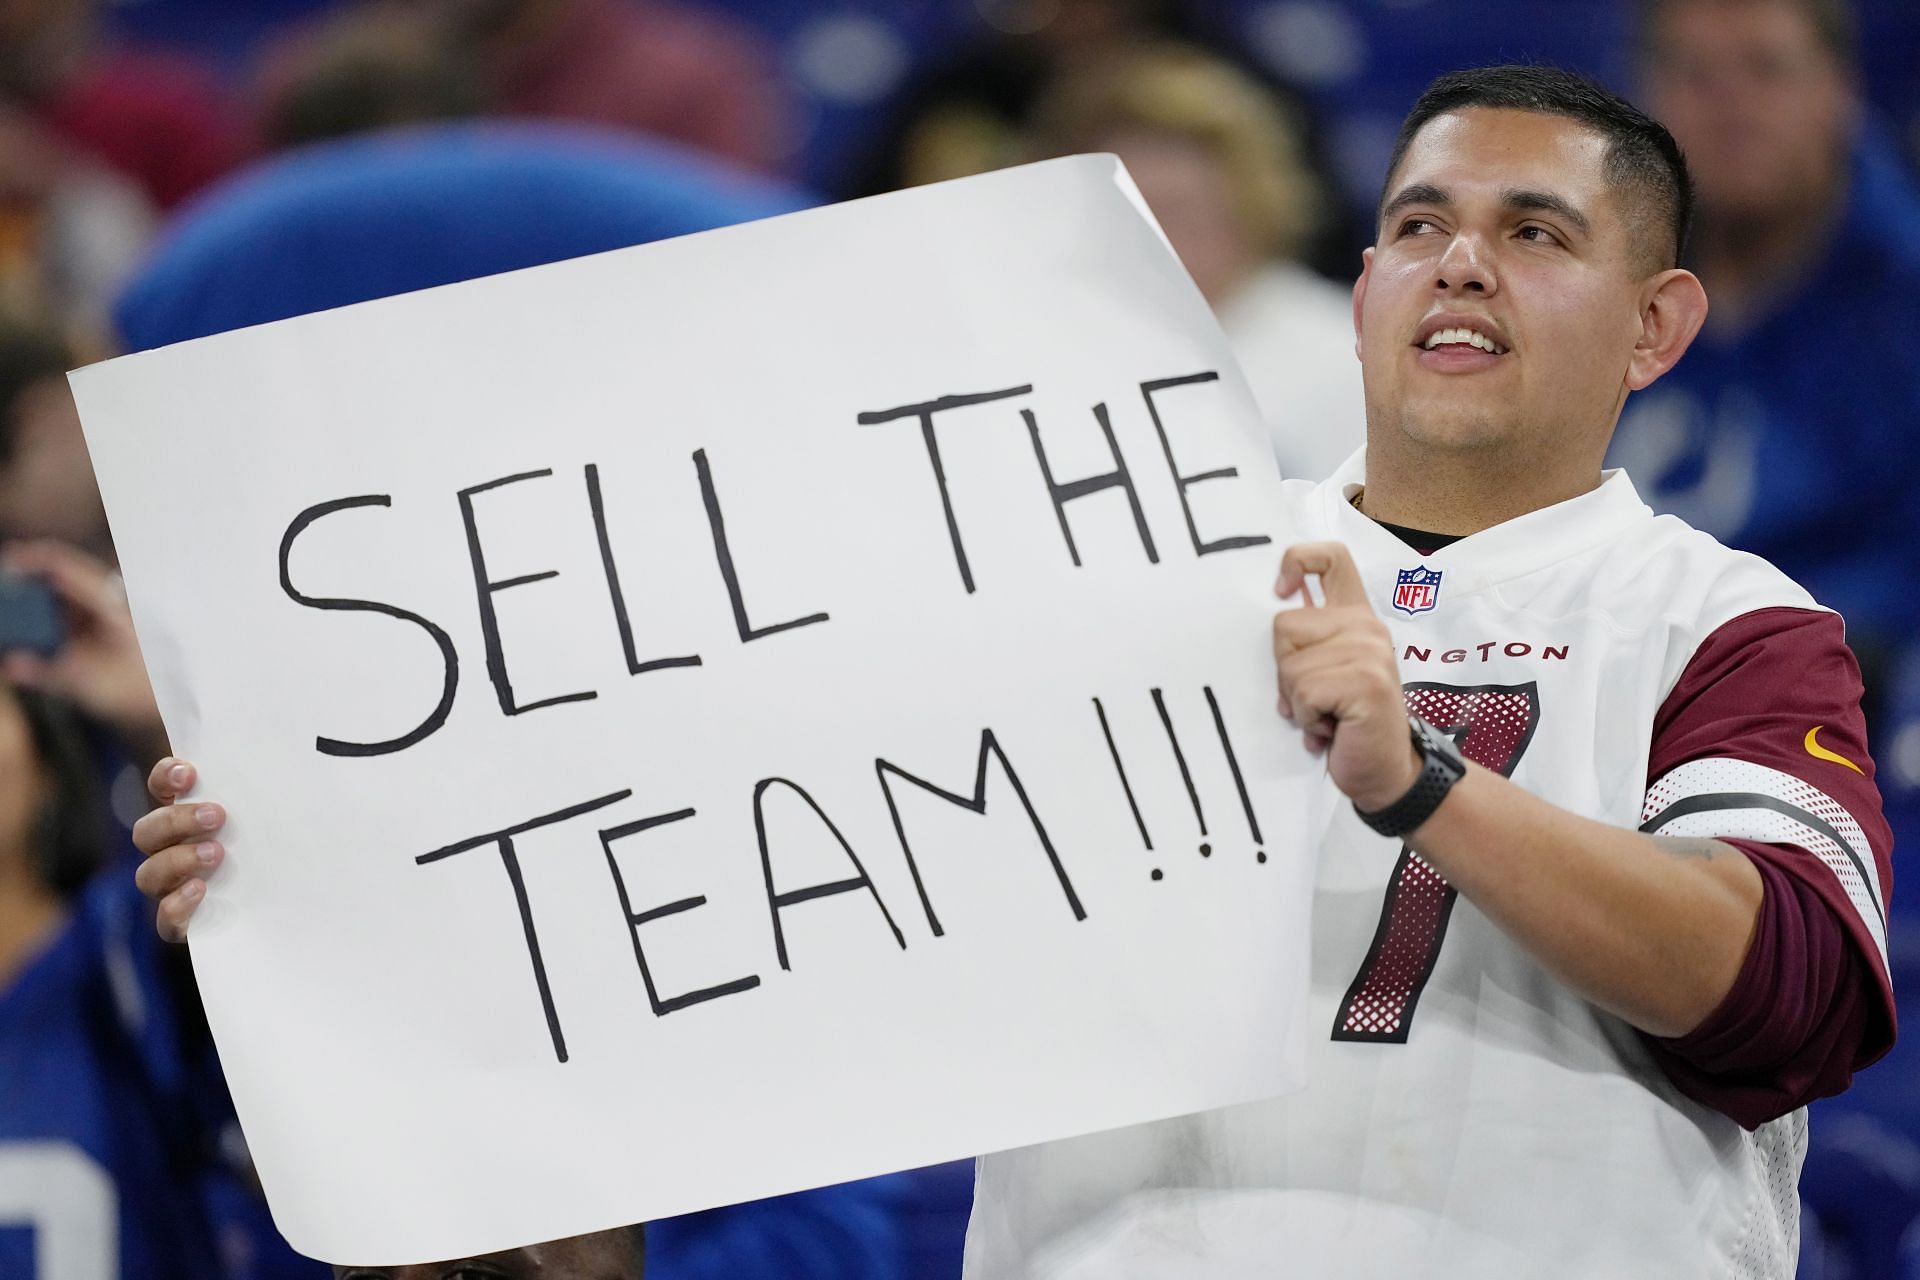 Washington Commanders fans implore Dan Snyder to sell